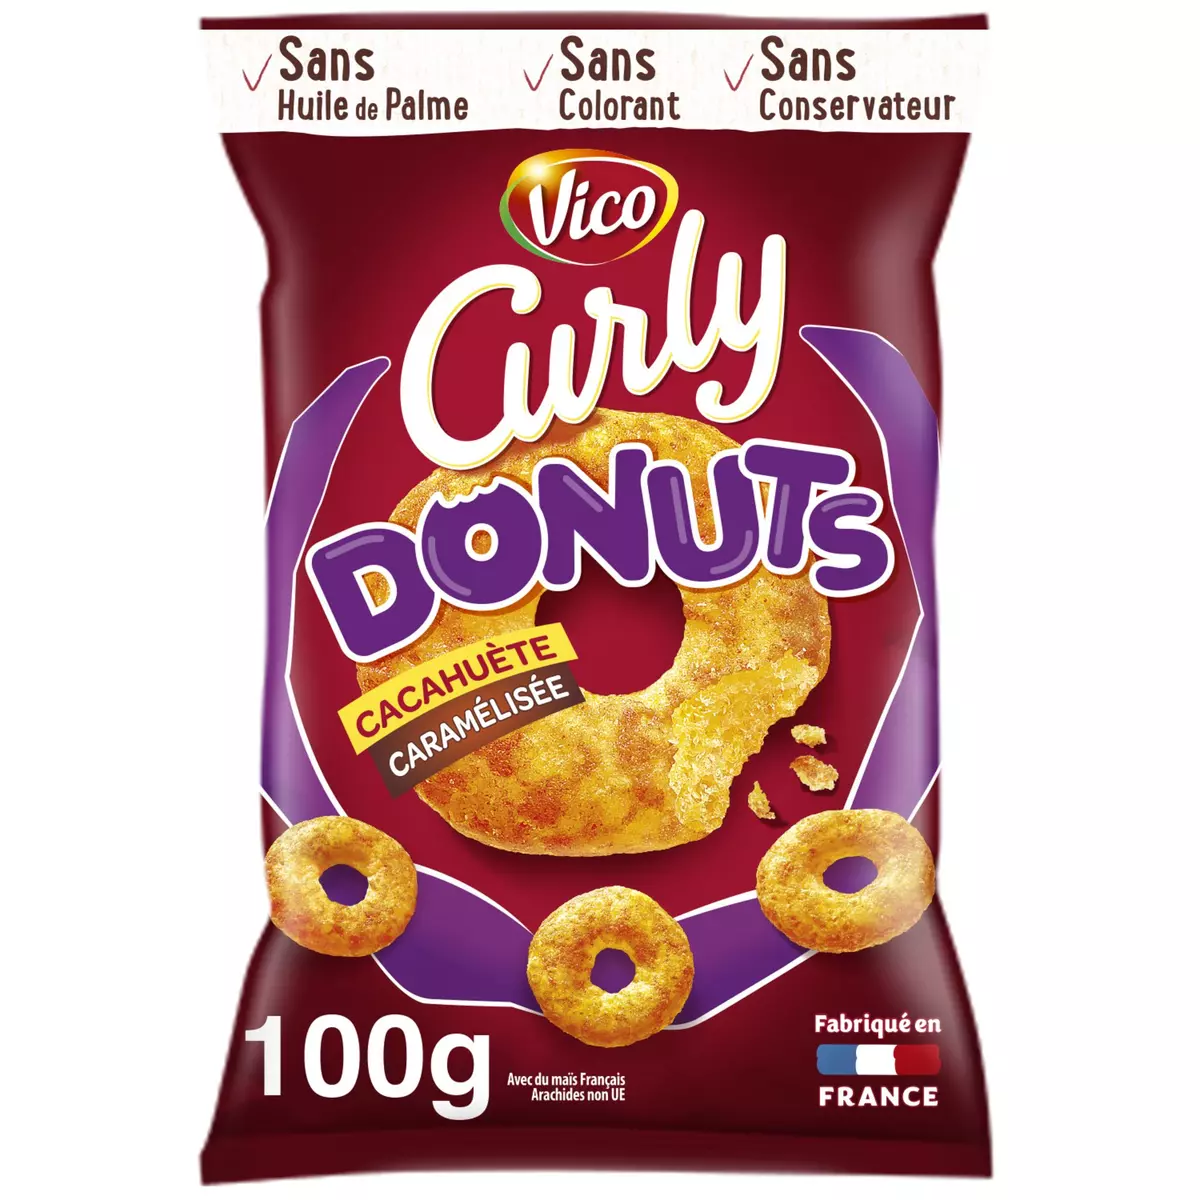 CURLY Biscuits soufflés Donuts cacahuète 100g